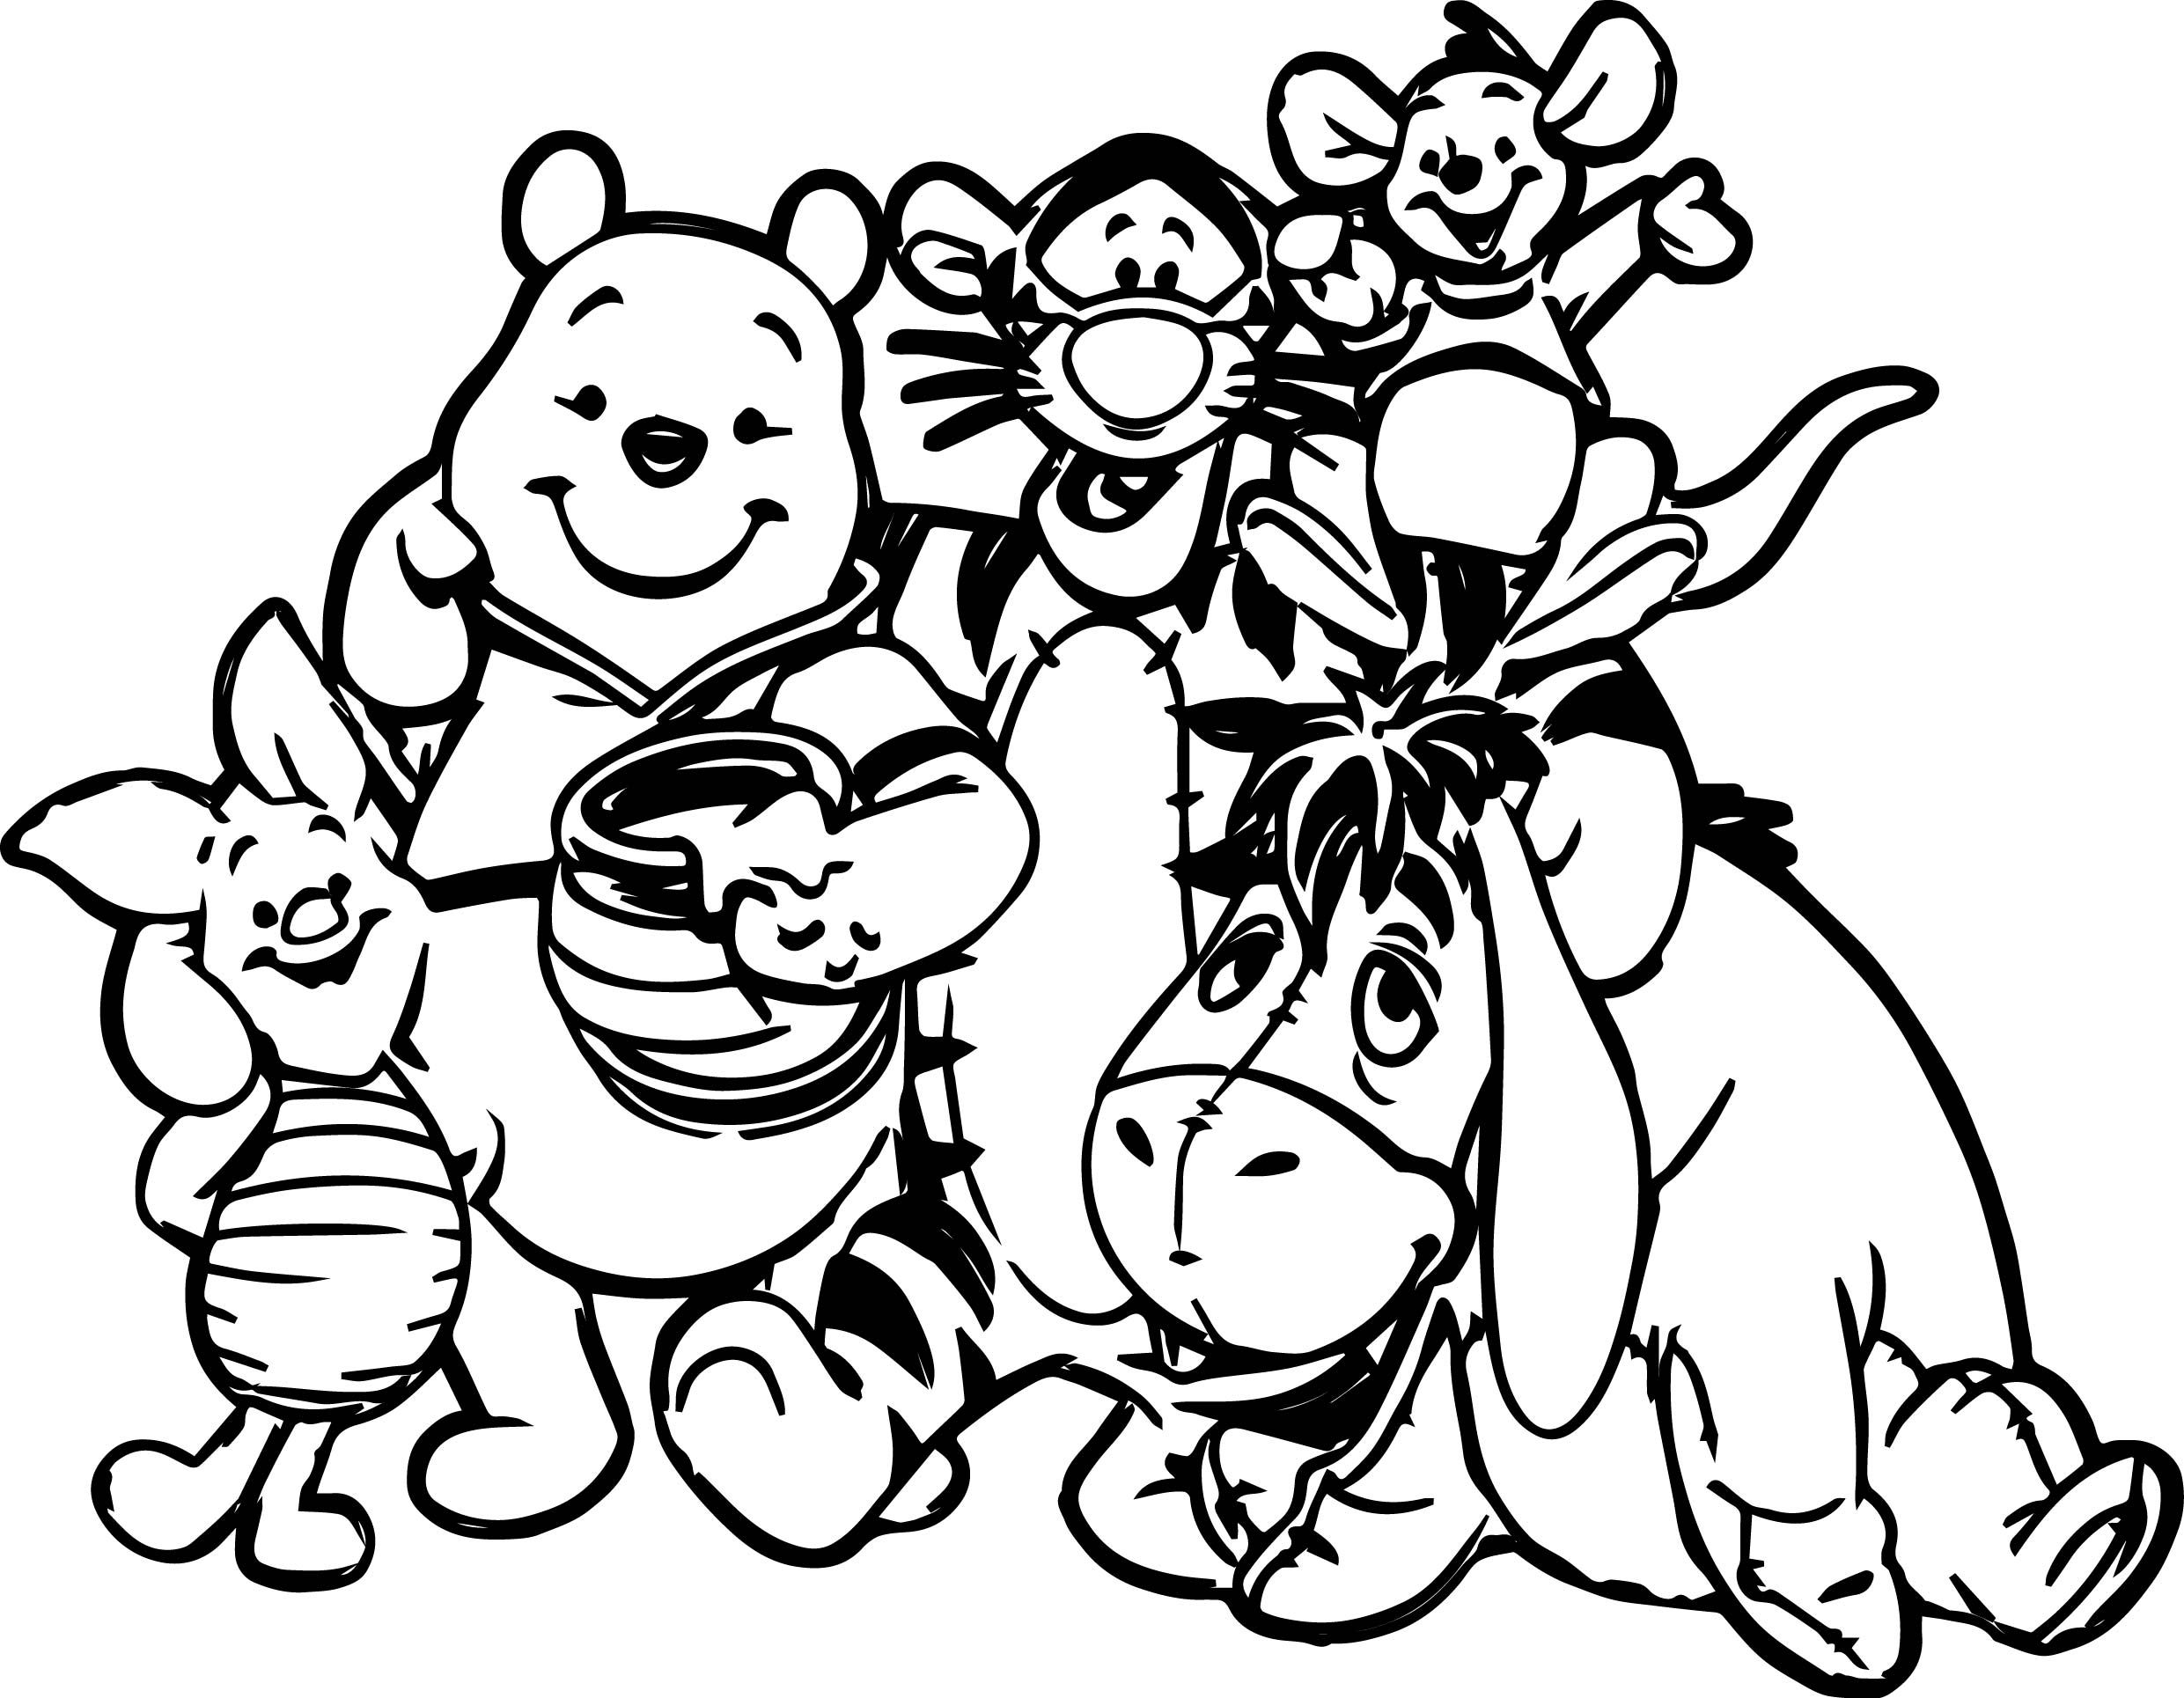 Winnie the pooh friends coloring page